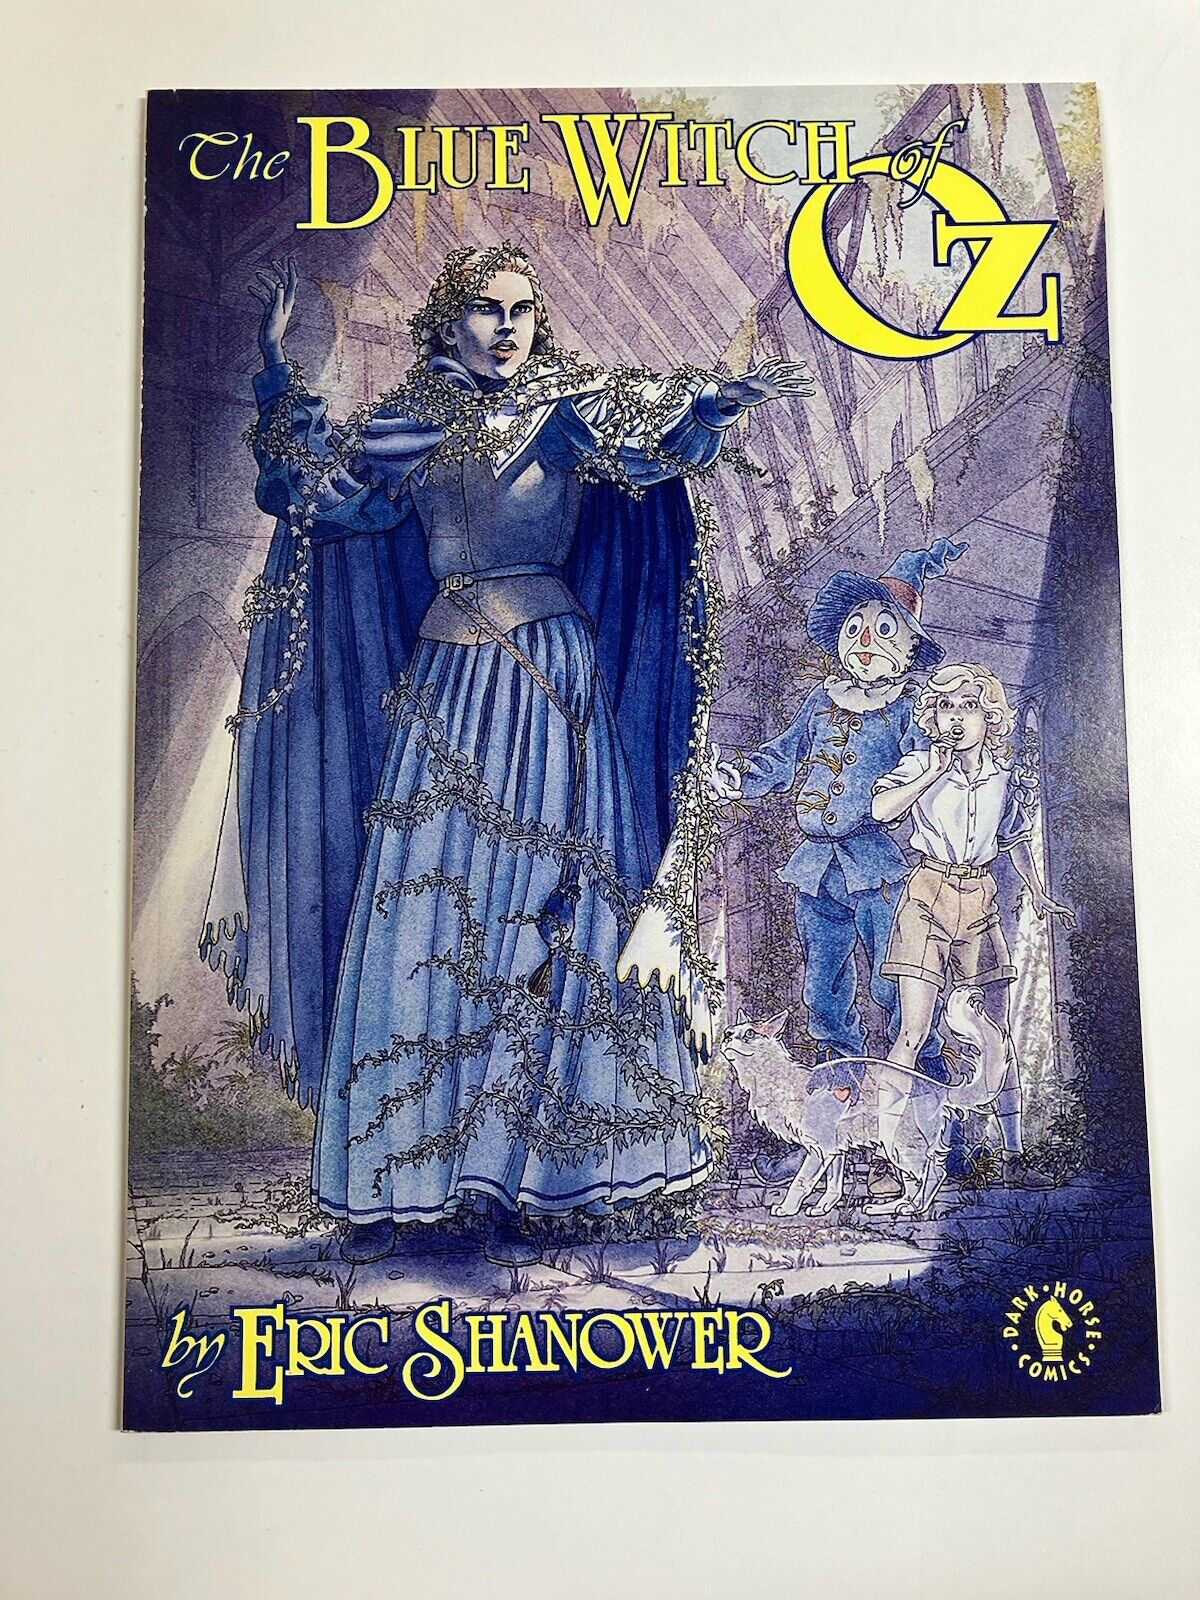 THE BLUE WITCH OF OZ by Eric Shanower  Graphic Comic Book - 1st Edition 1992 VF